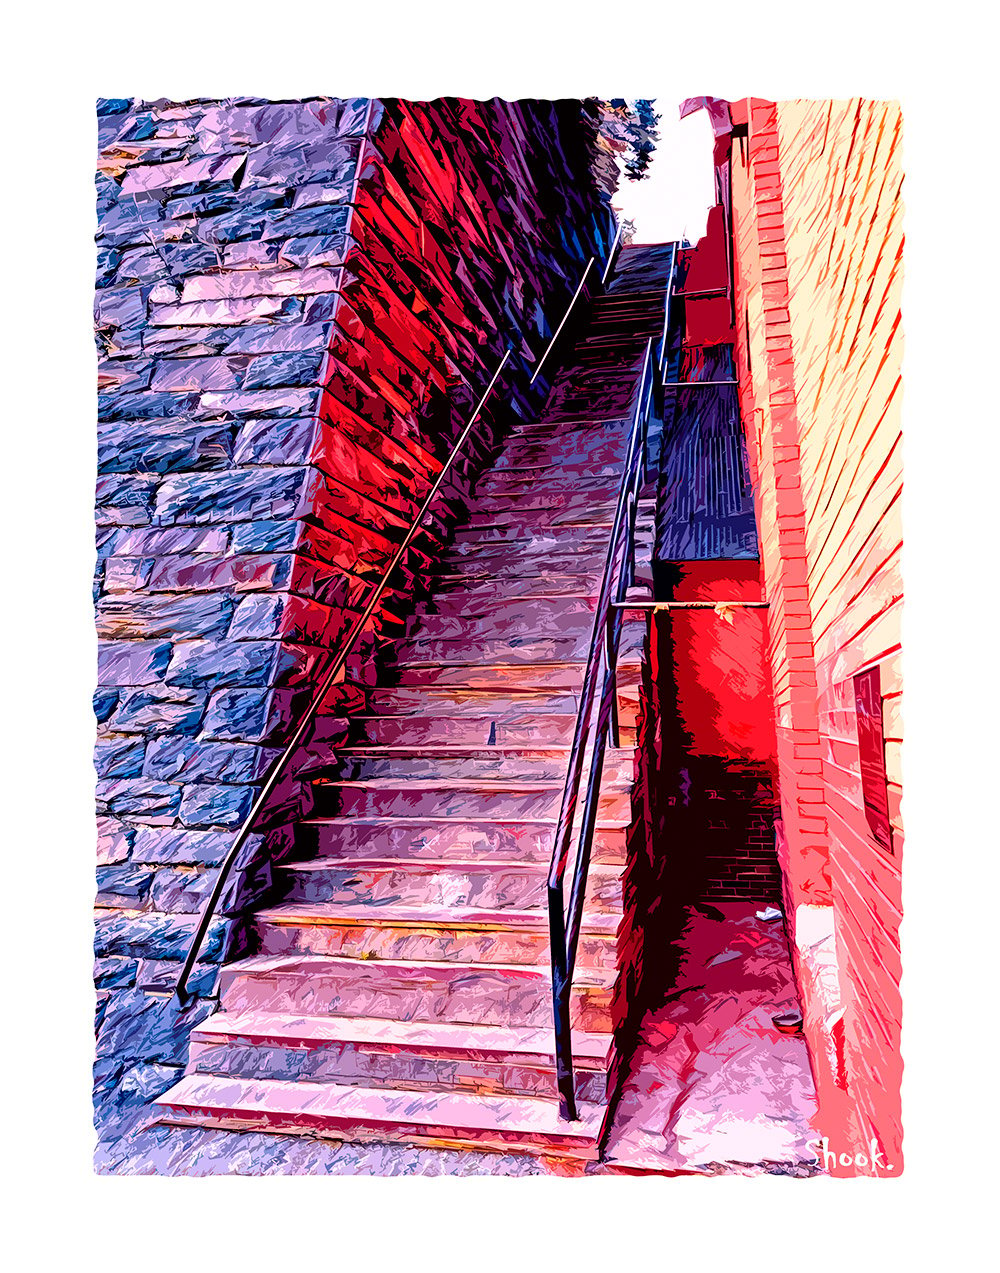 The Exorcist Stairs DC Giclée Art Print (Multi-size options)